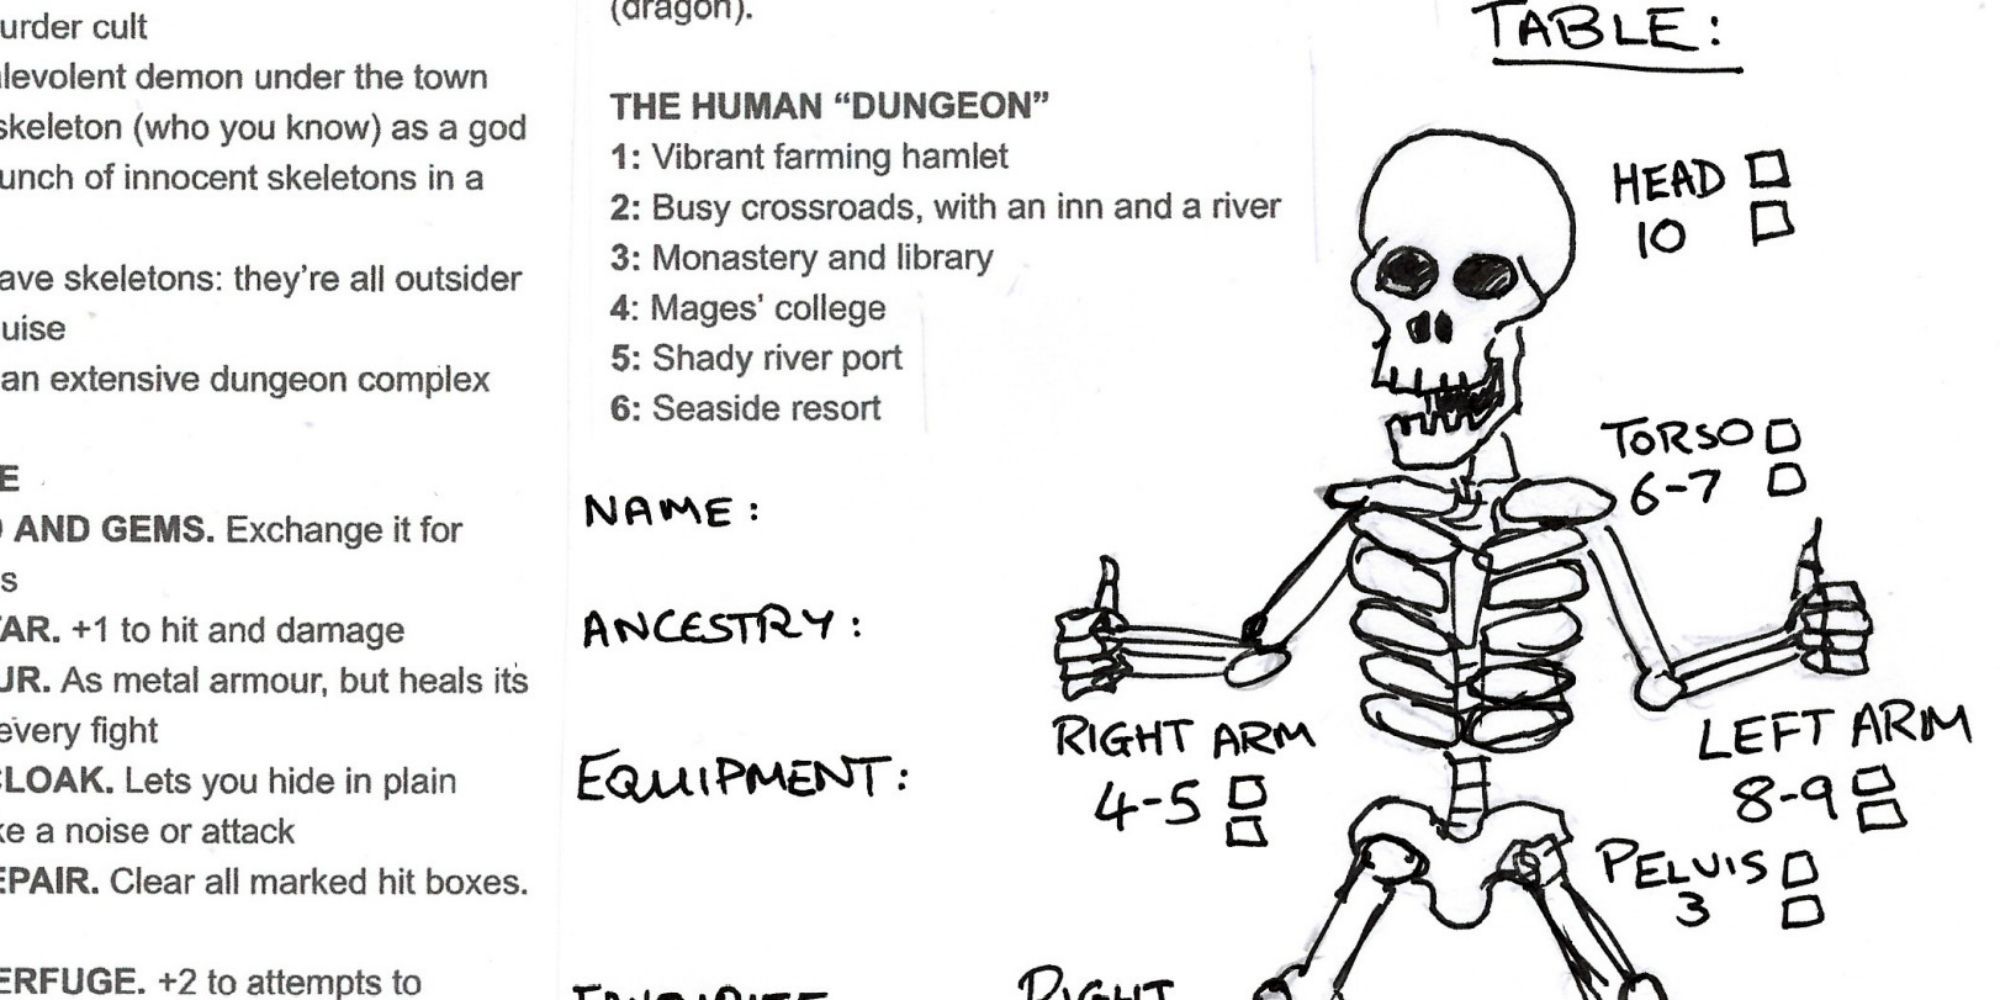 A cartoon skeleton giving a thumbs up in Adventure Skeletons